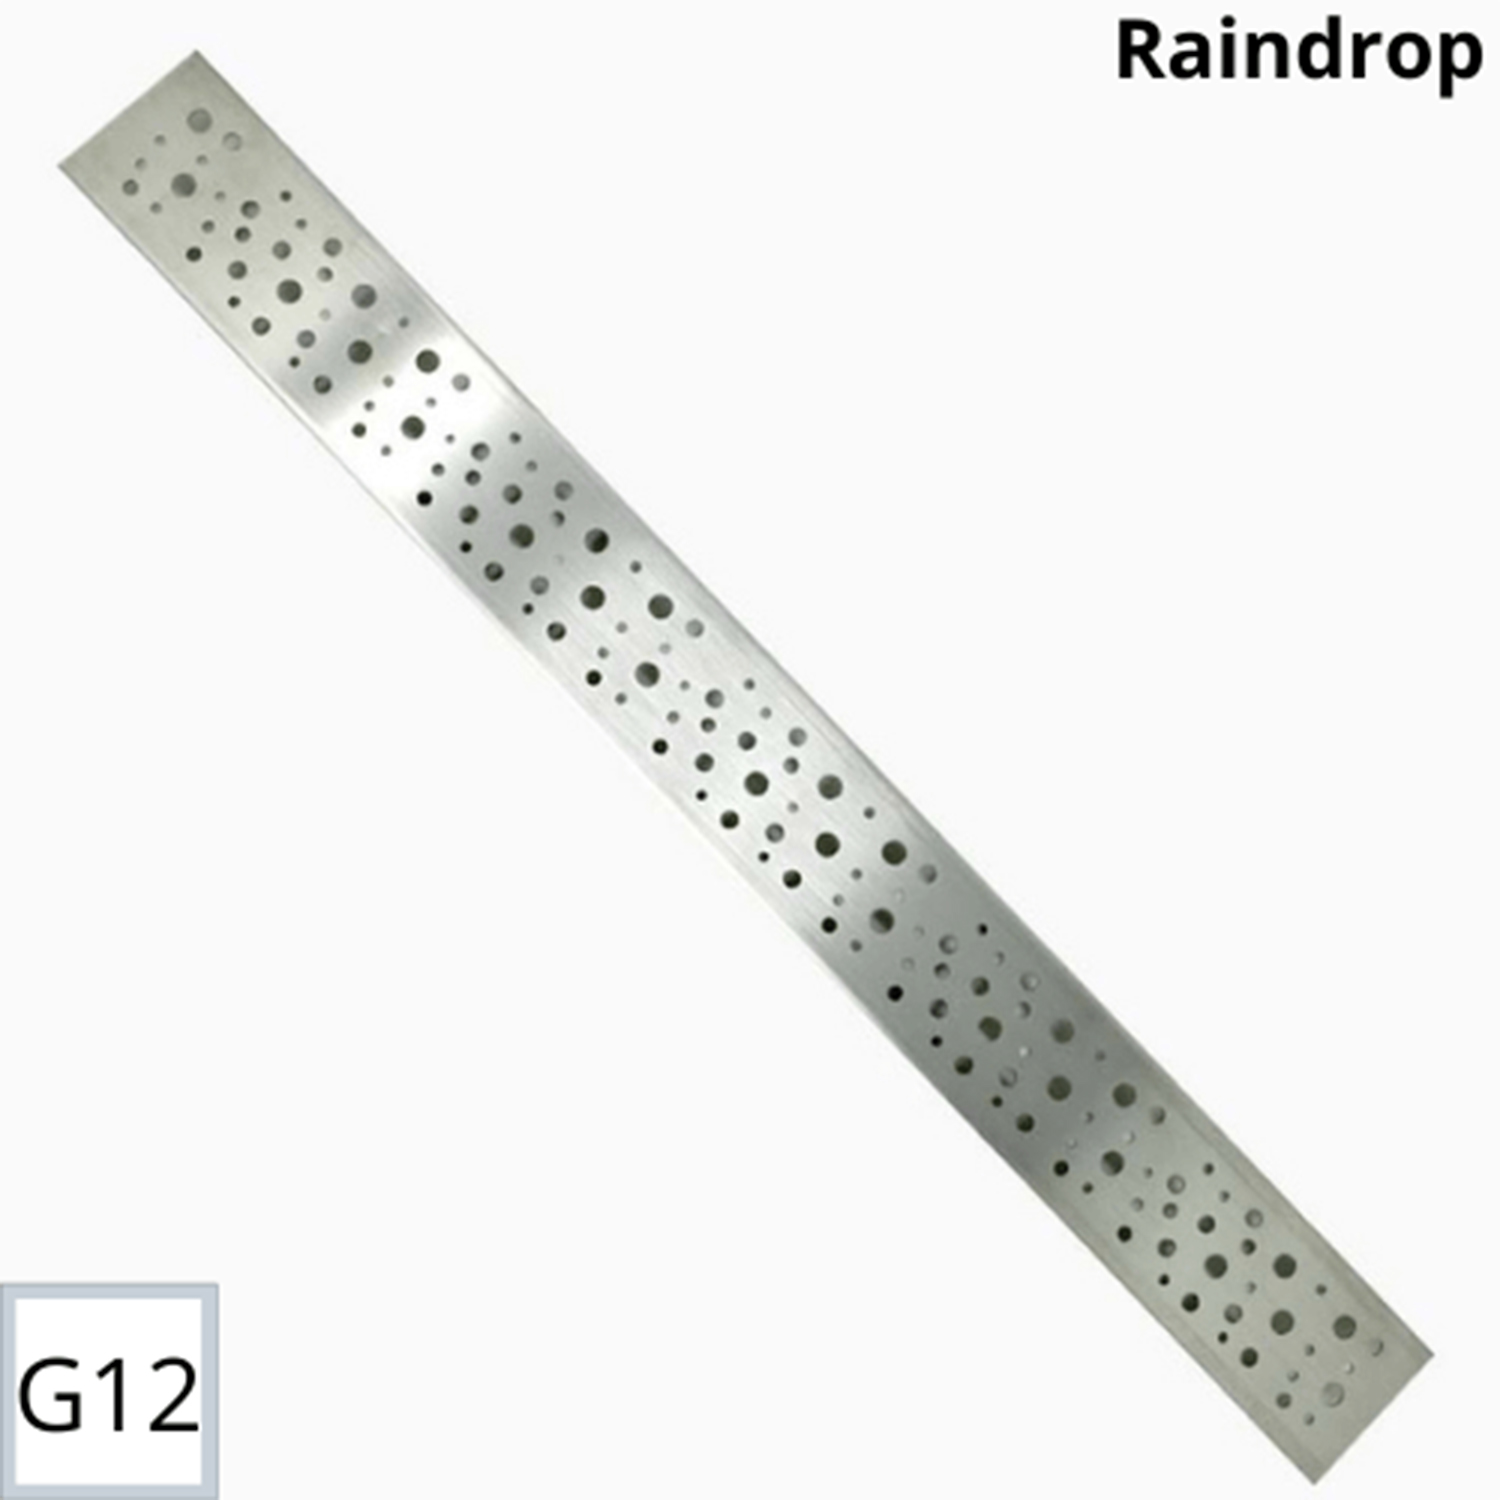 36" Blank Linear Drain with Blue Membrane - G12 - IB TOOLS